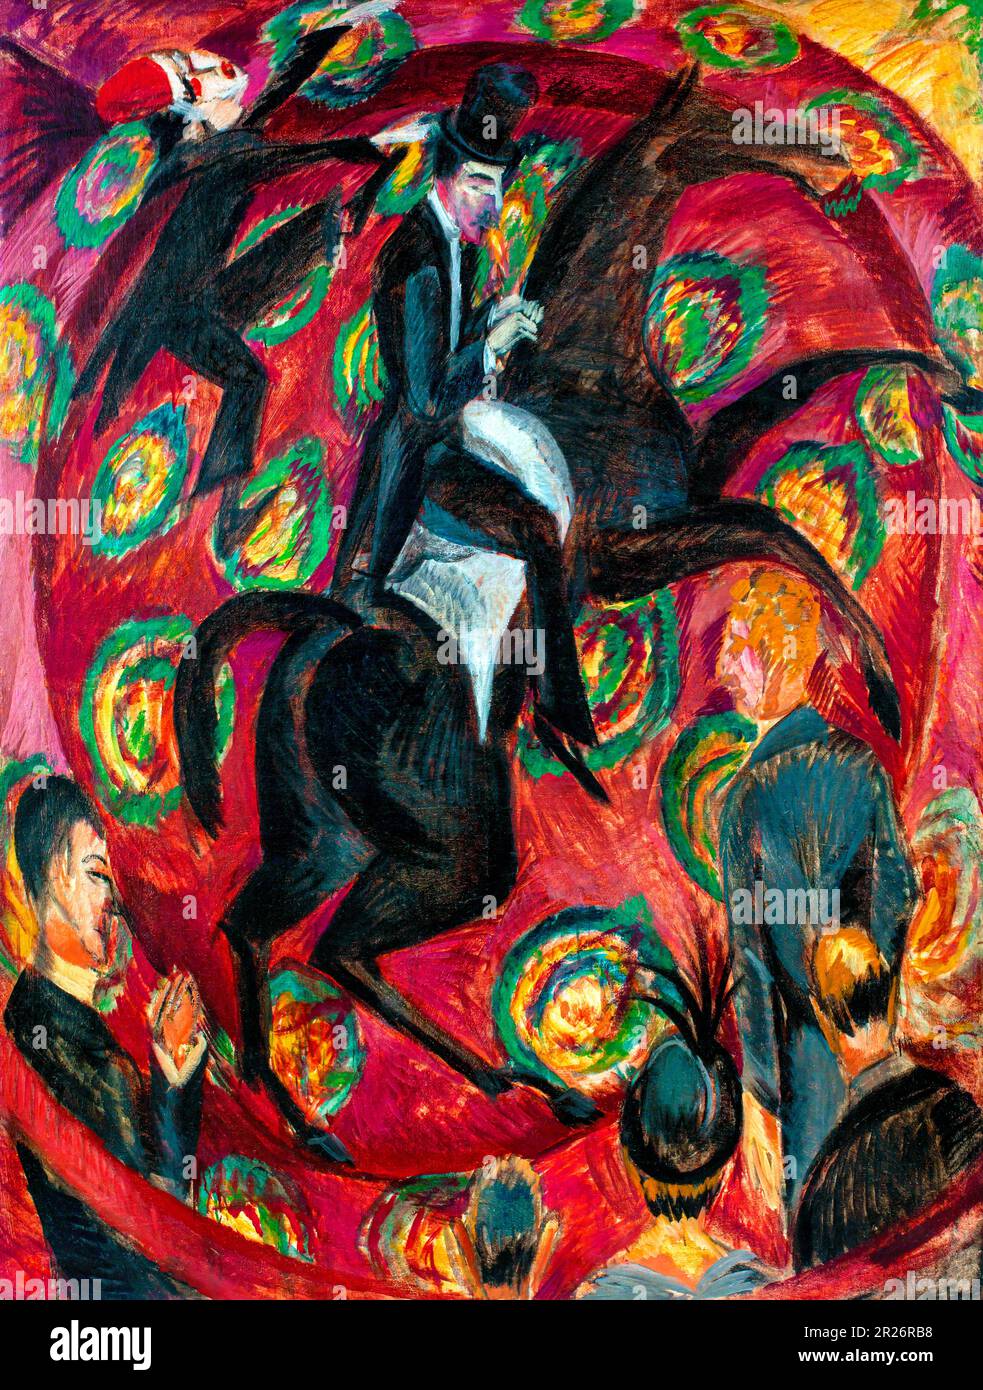 Ernst Ludwig Kirchner's Circus Rider, Dancers with Castanets famous painting. Original from the Saint Louis Art Museum. Stock Photo